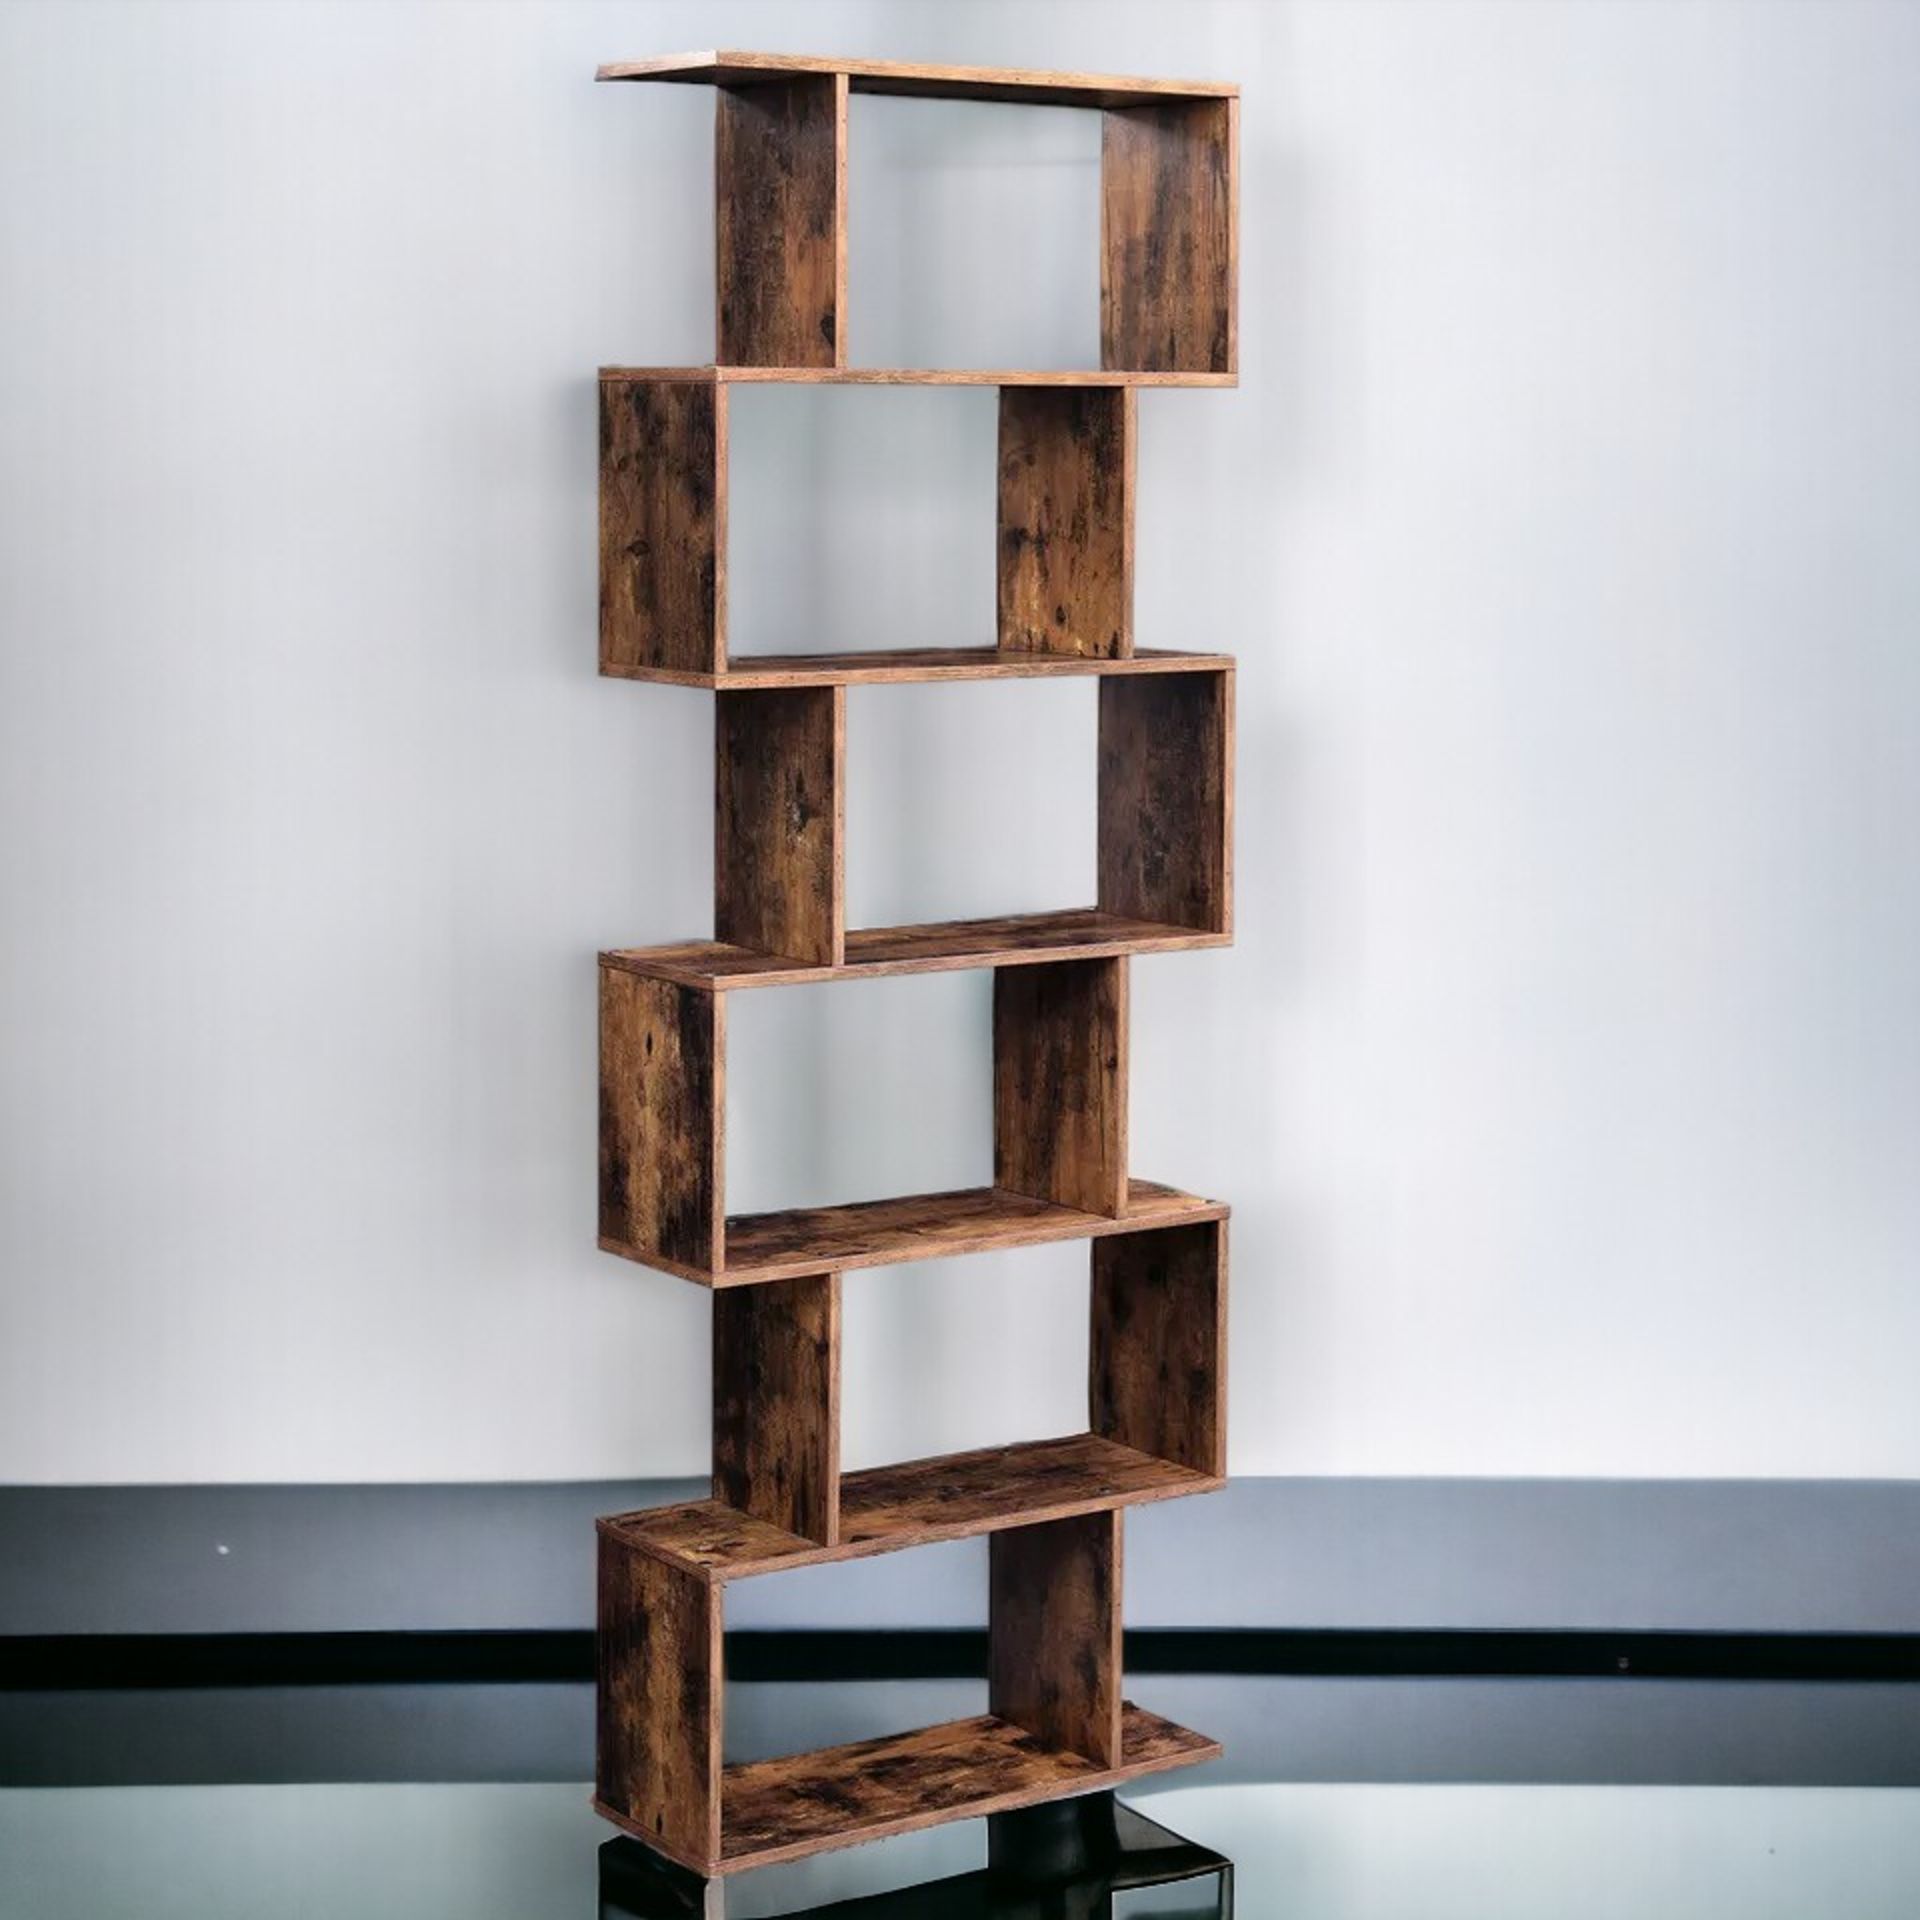 FREE DELIVERY - BRAND NEW RETRO BOOKCASE S SHAPE SHELVING UNIT 6 TIER DISPLAY STORAGE